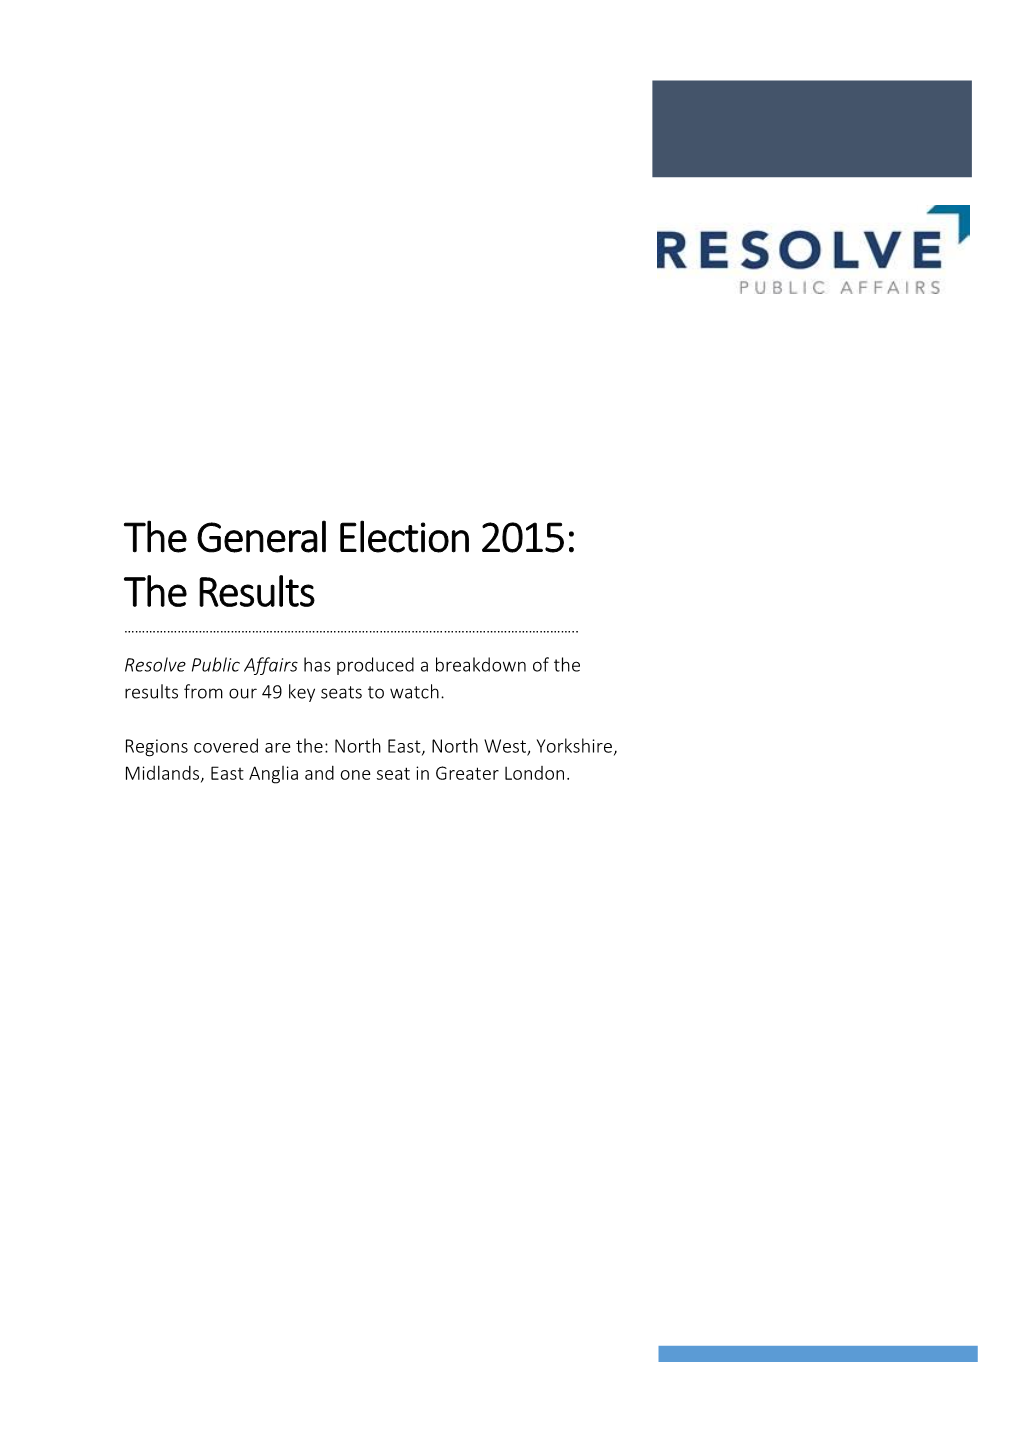 The General Election 2015: the Results ………………………………………………………………………………………………………………